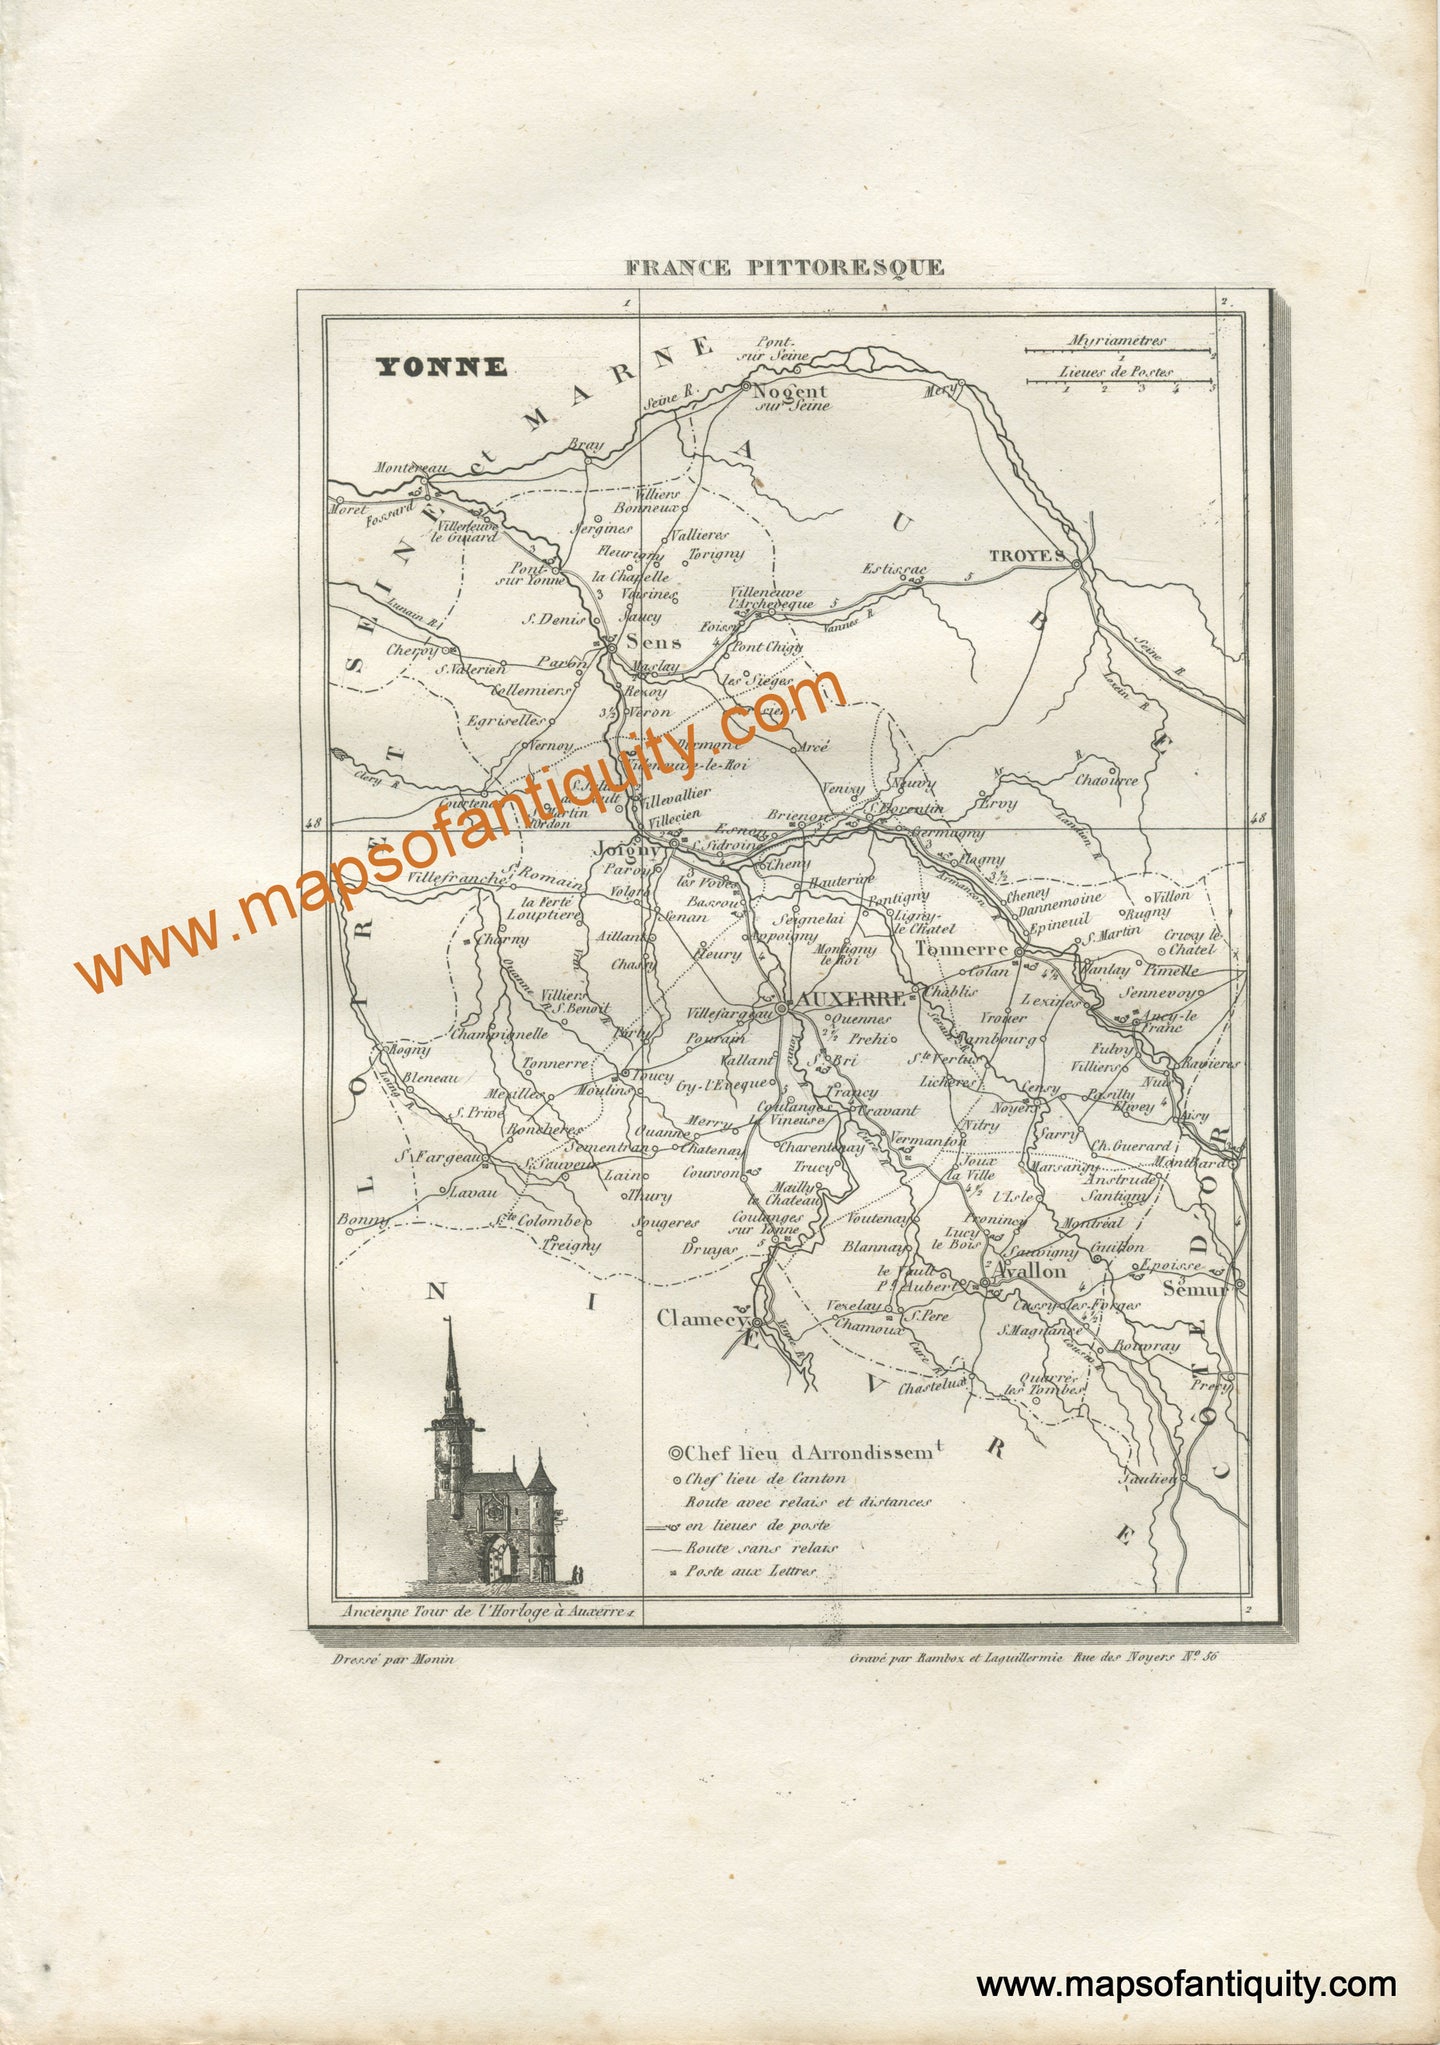 Antique-Black-and-White-Map-France-Yonne-including-the-cities-of-Troyes-Sens-Avallon-and-Auxerre-Europe-France-1835-Monin-Maps-Of-Antiquity